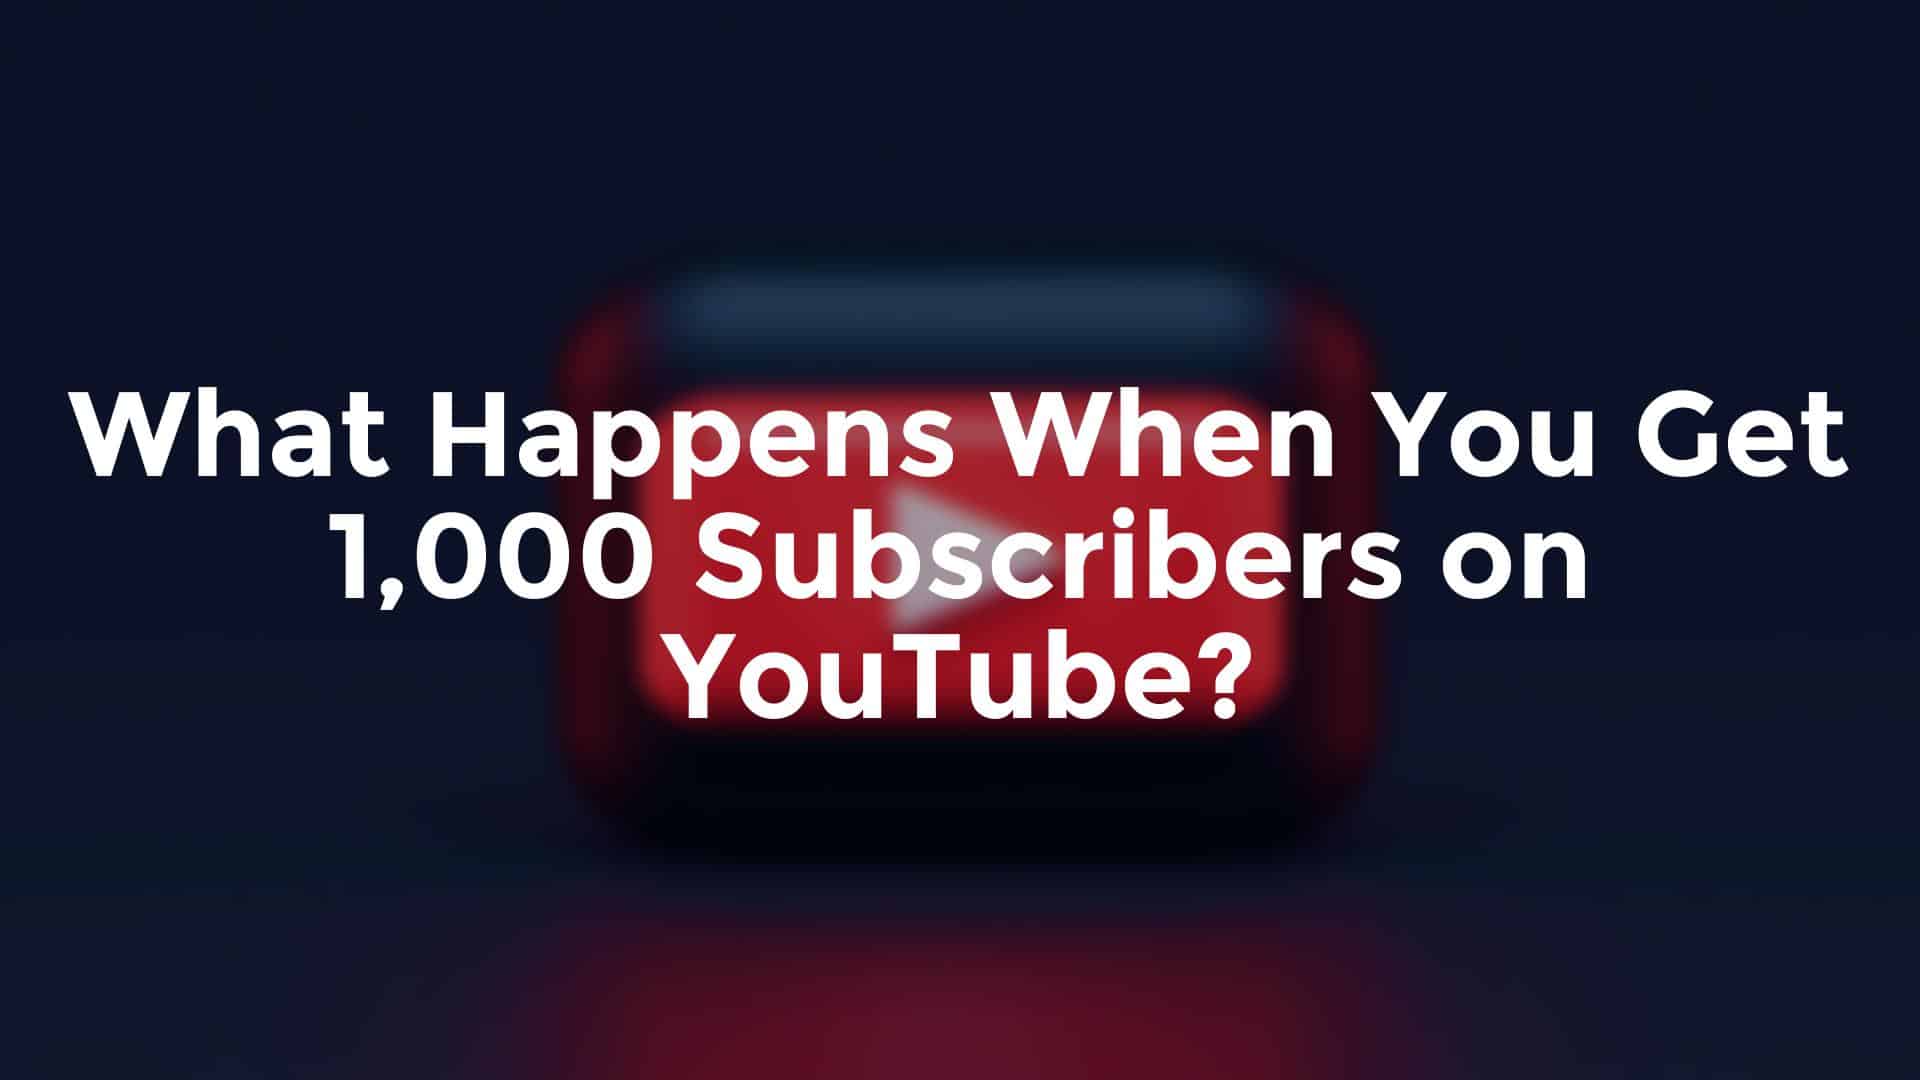 So You Got 1,000 Subscribers on YouTube… Now What?